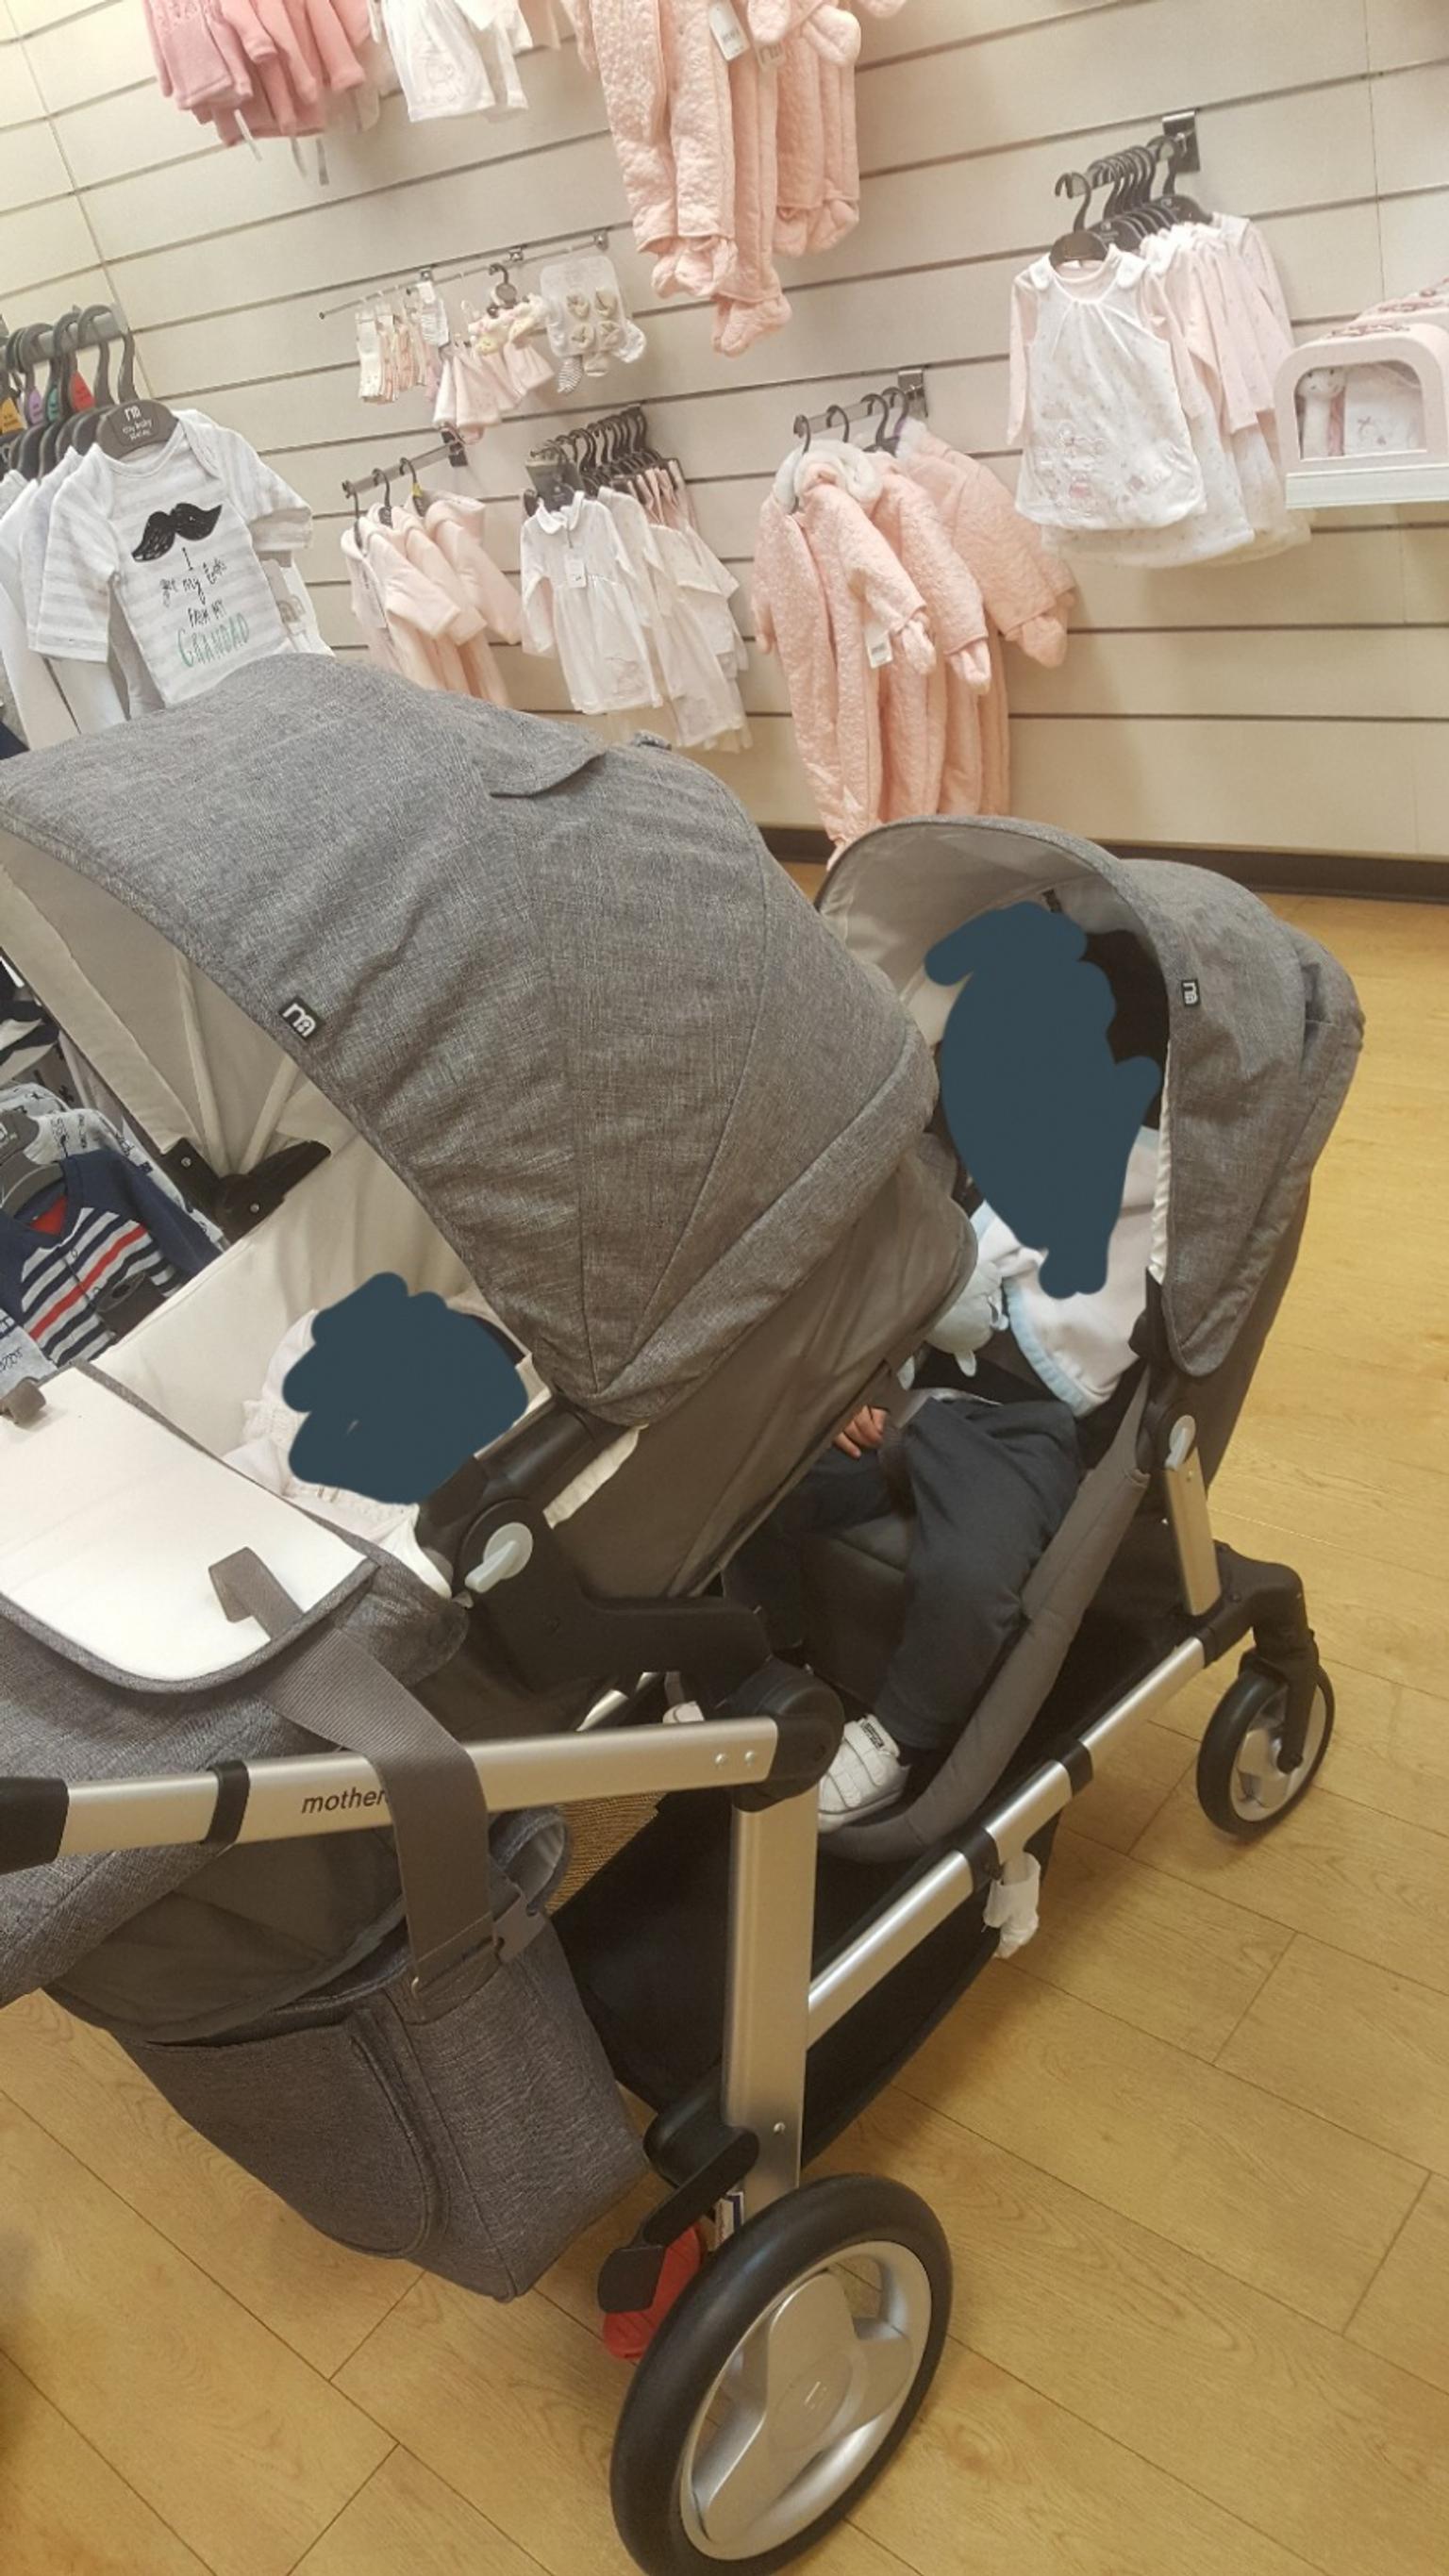 mothercare genie double buggy